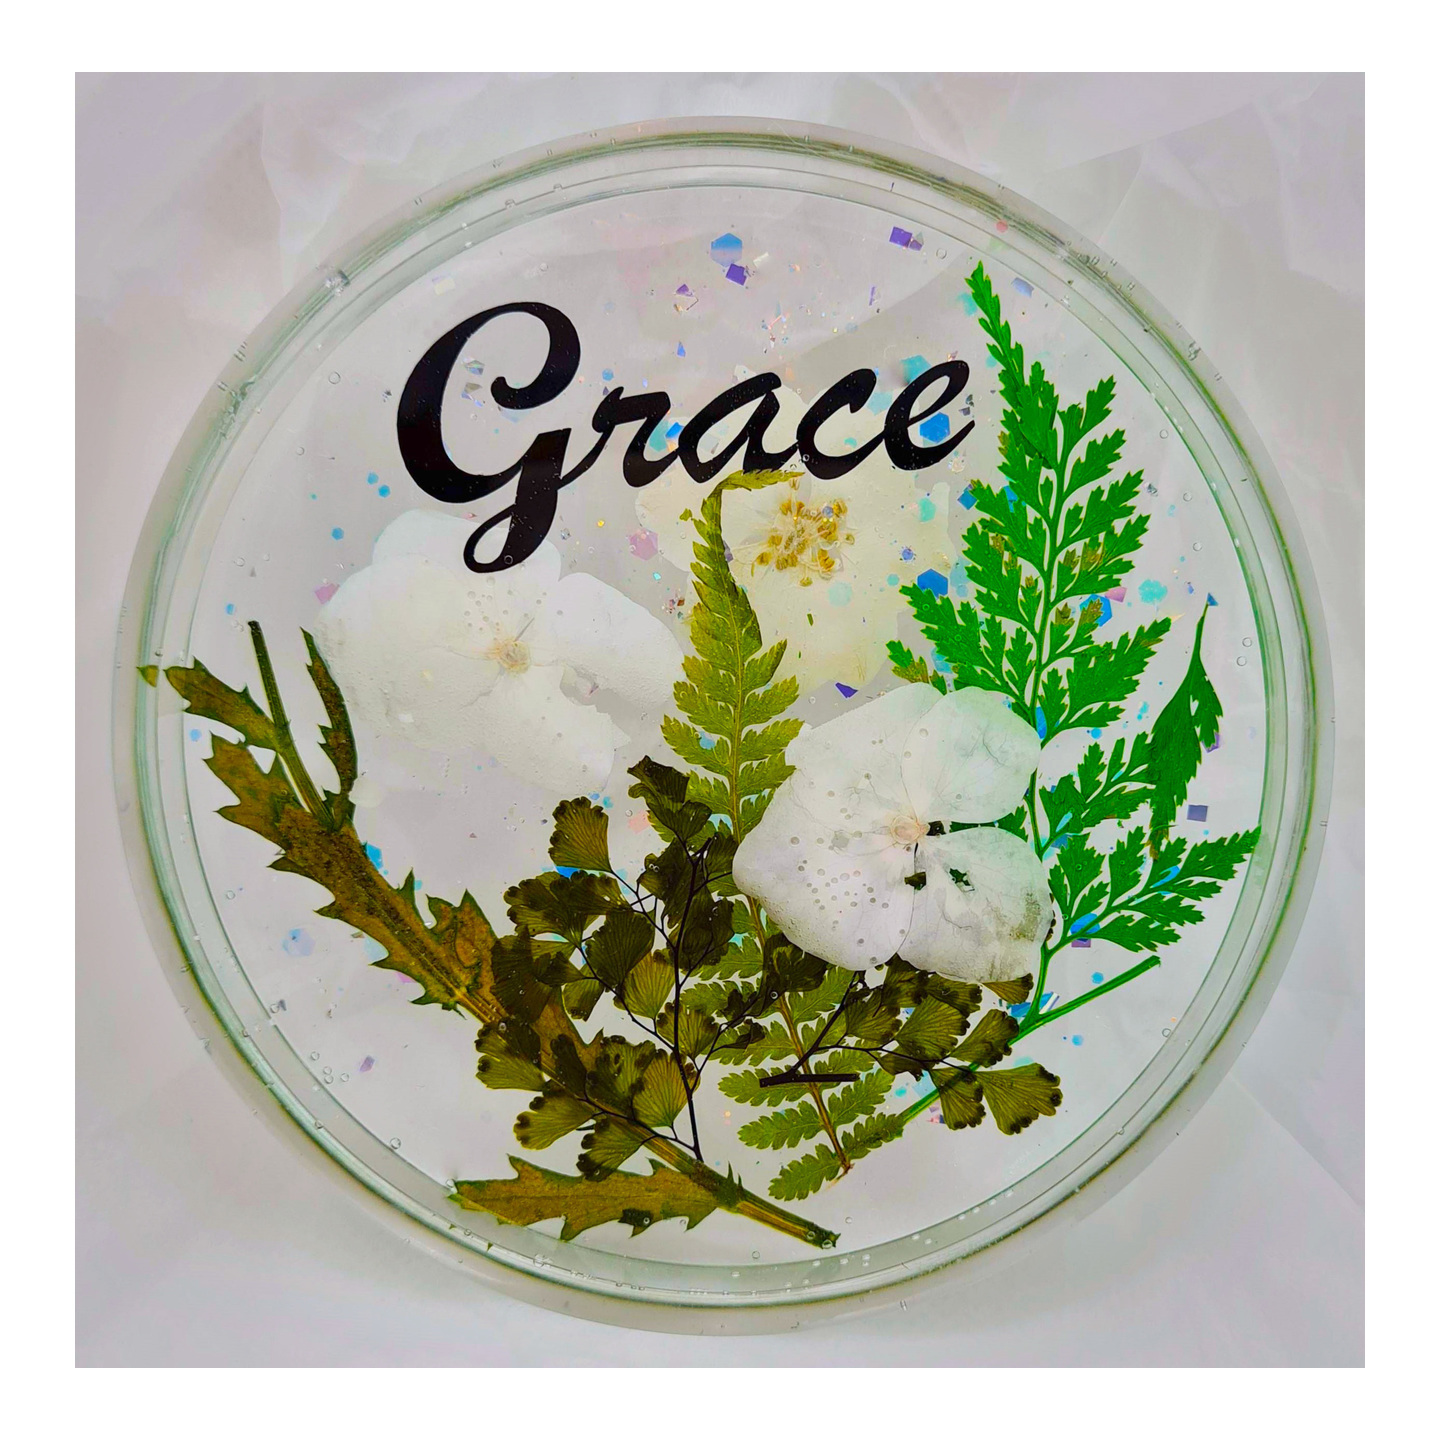 Grace  Real Pressed Flowers & Leaves Resin Coaster with an inspirational word Handmade